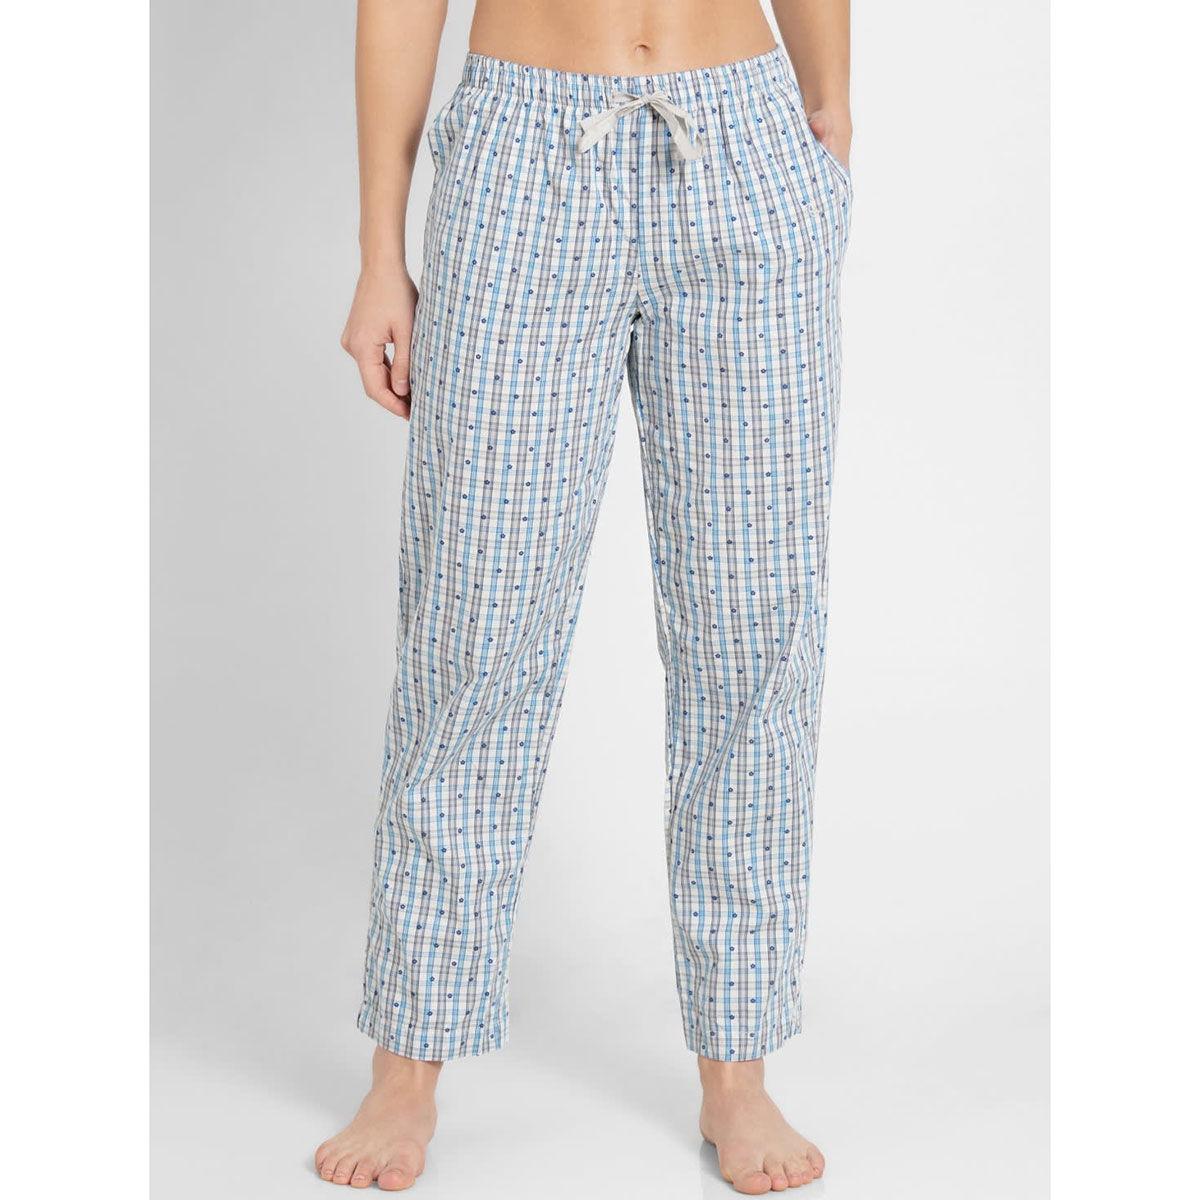 vapour-blue-assorted-checks-long-pant-:-style-number-#-rx06